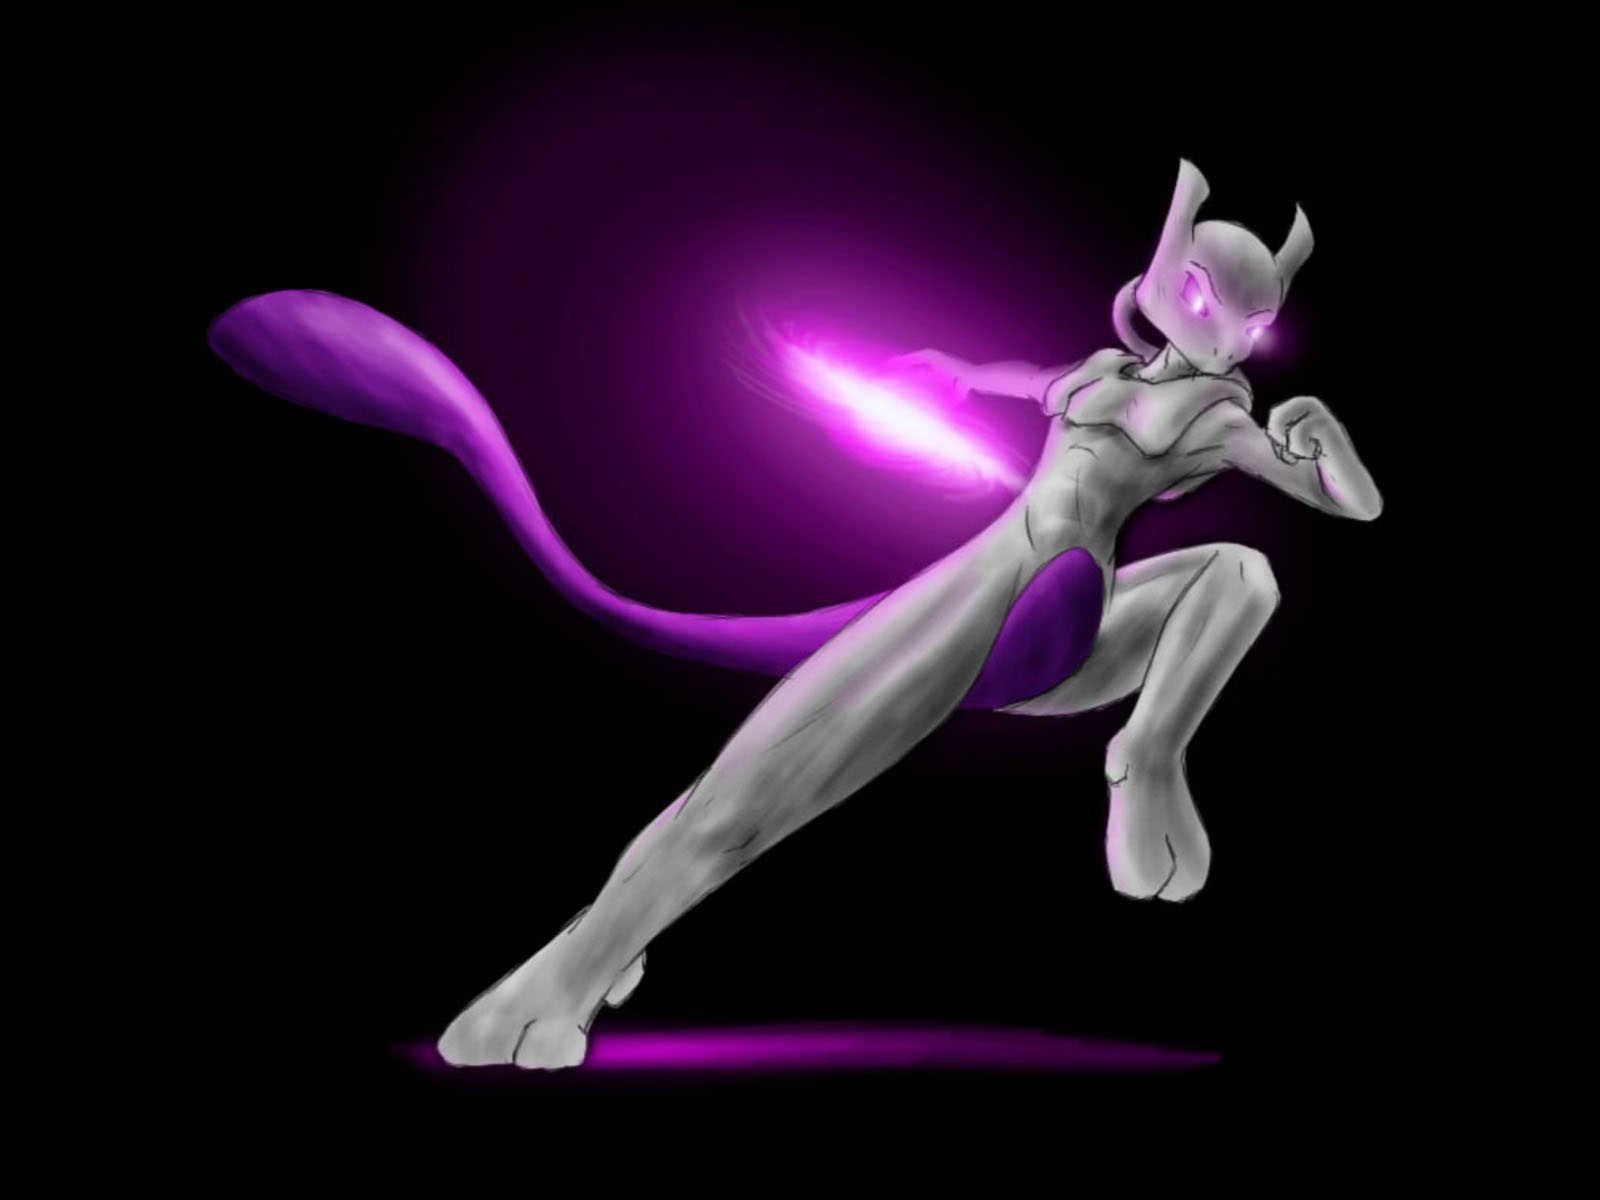 wallpapers: Mewtwo Pokemon Wallpapers.